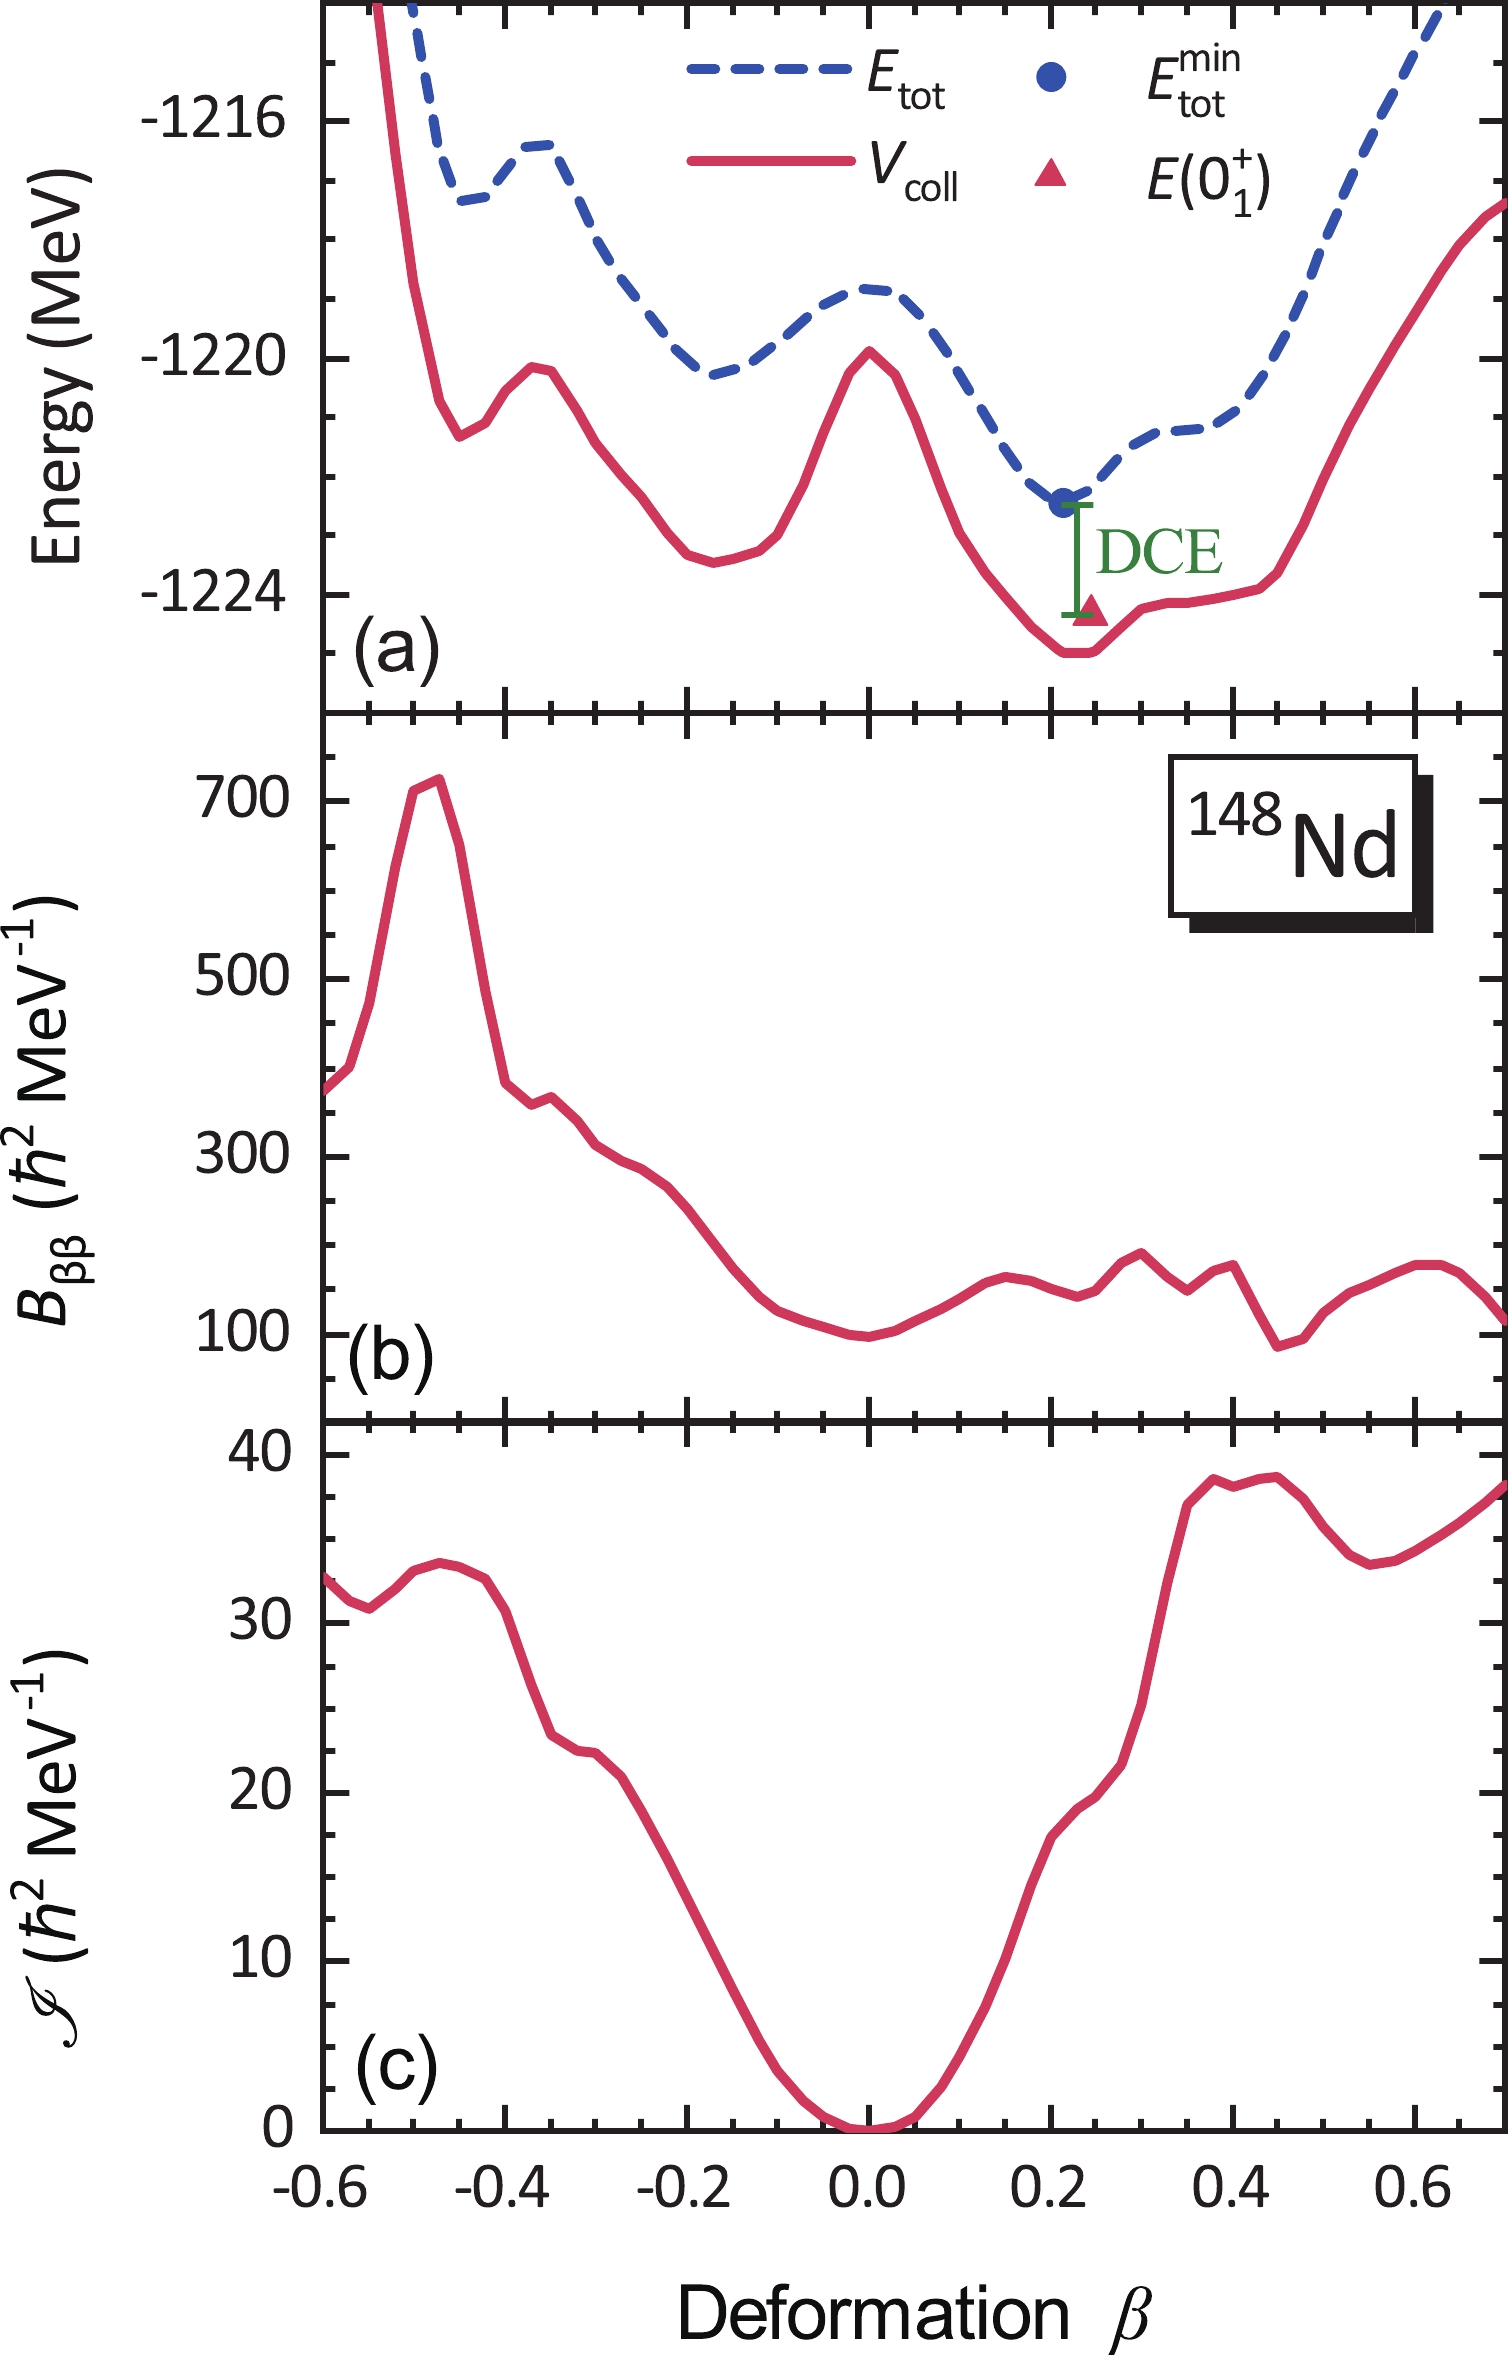 Beyond-mean-field dynamical correlations for nuclear mass table in 